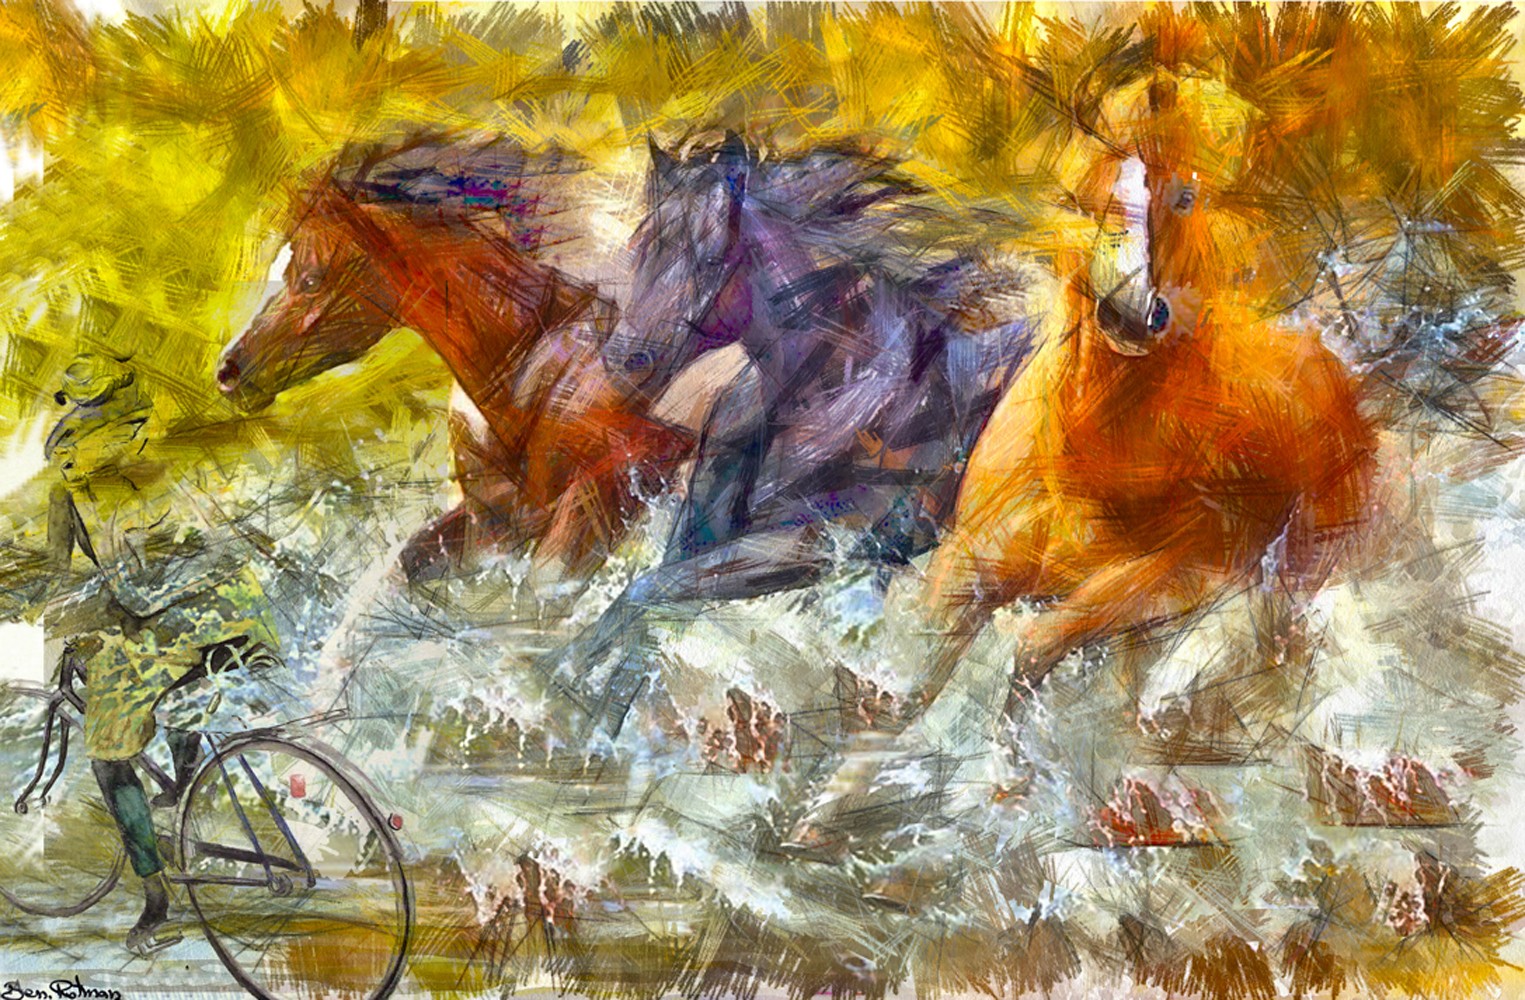 A gallop in the water